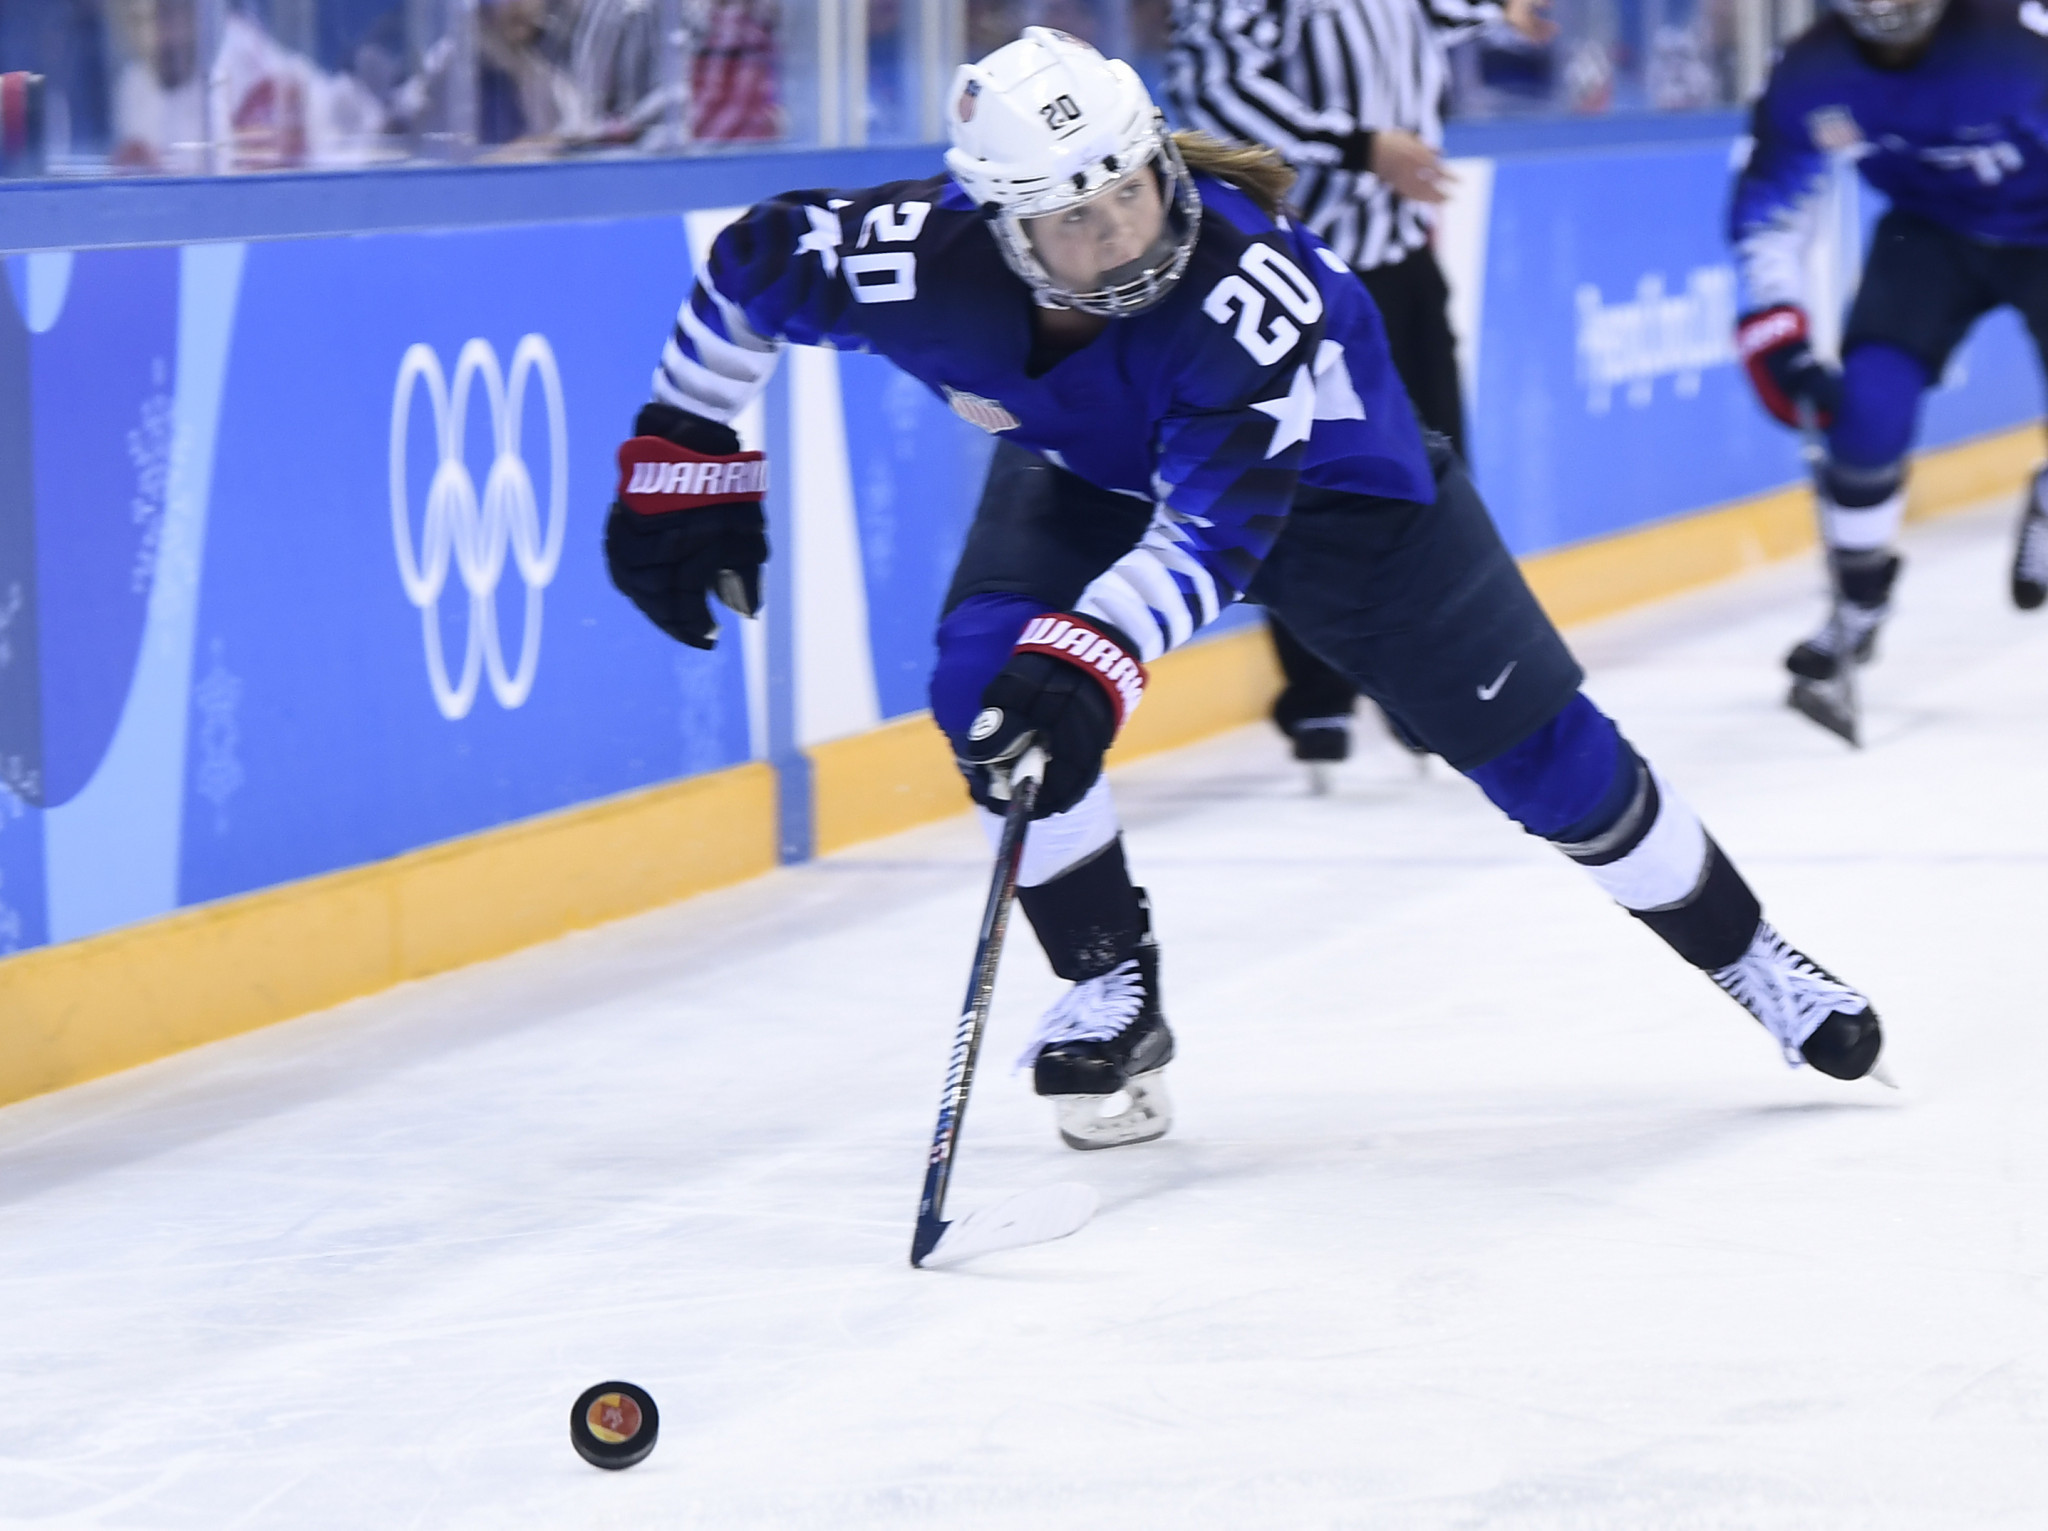 United States out to secure fifth straight IIHF Women's World Championship title in Espoo